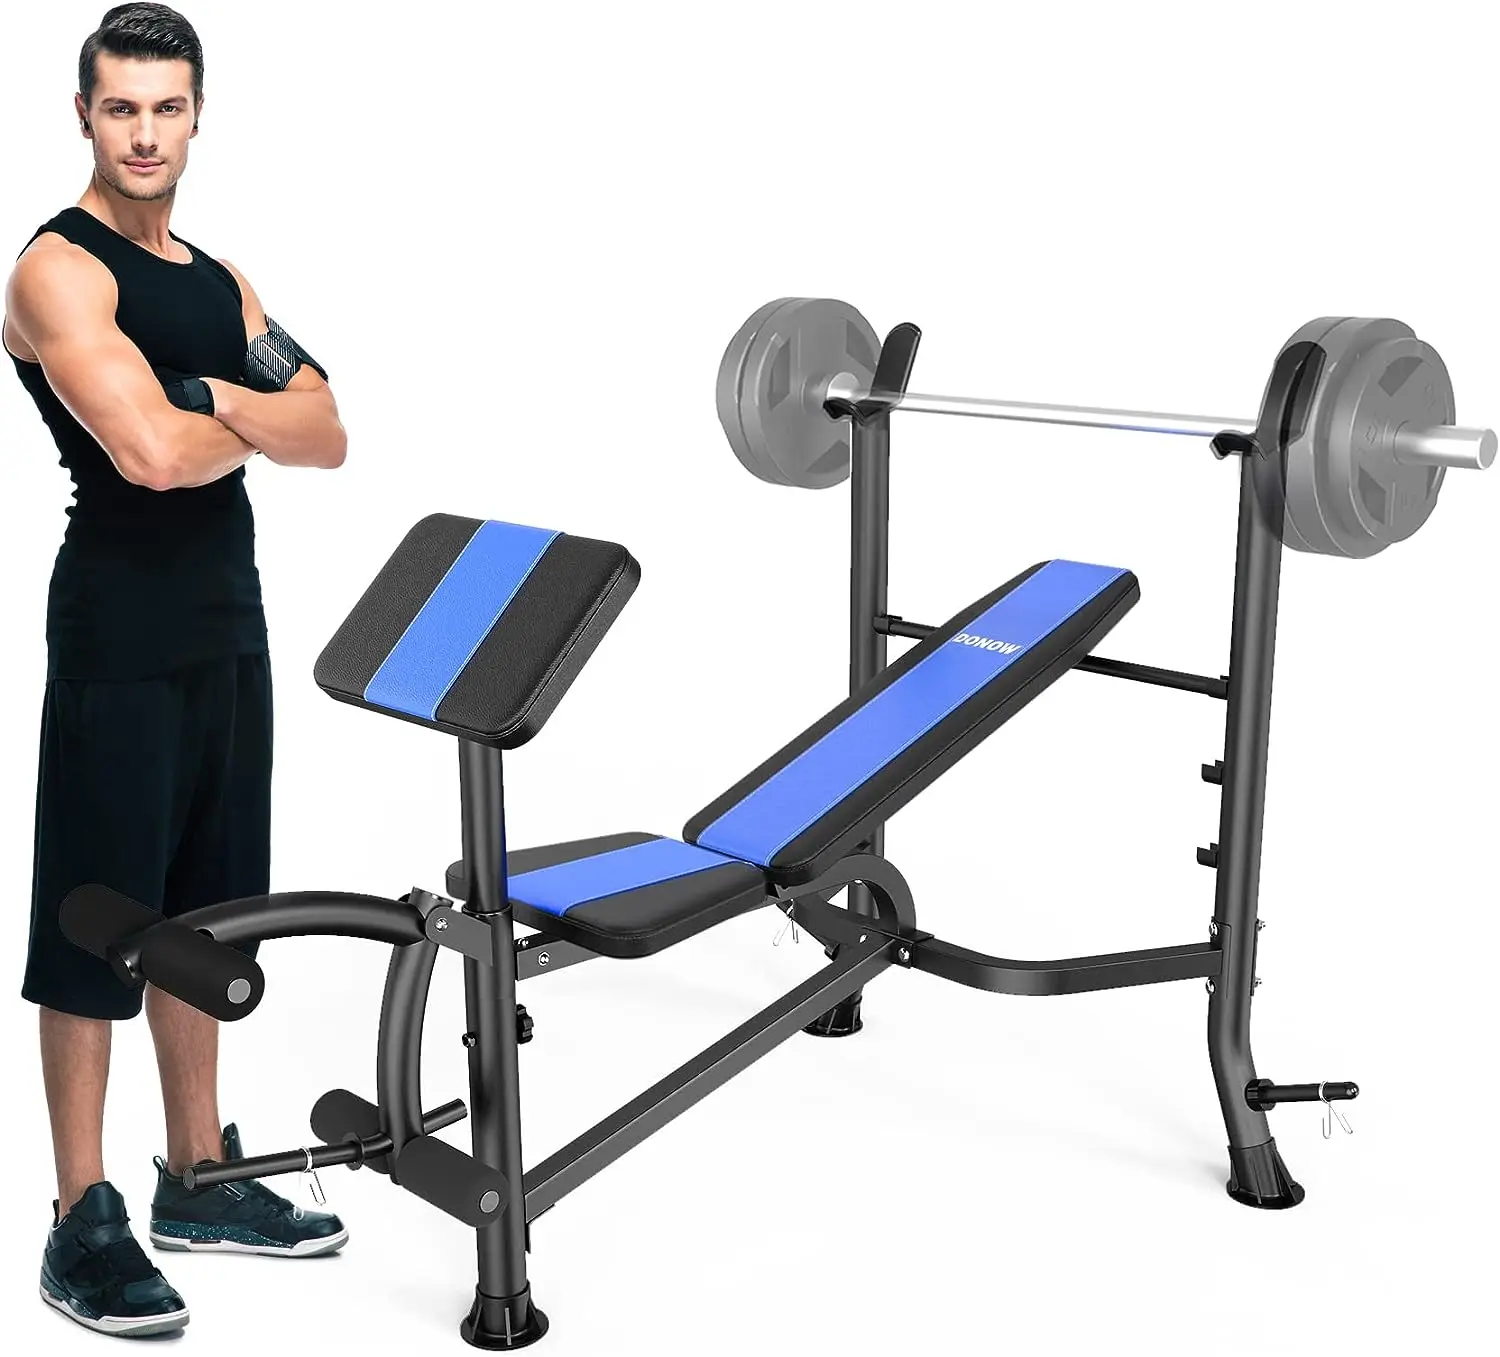 

Bench Adjustable With Barbell Bench Press Set with Leg Extension Preacher Curl and Weight Storage Workout Bench for Strength Tr